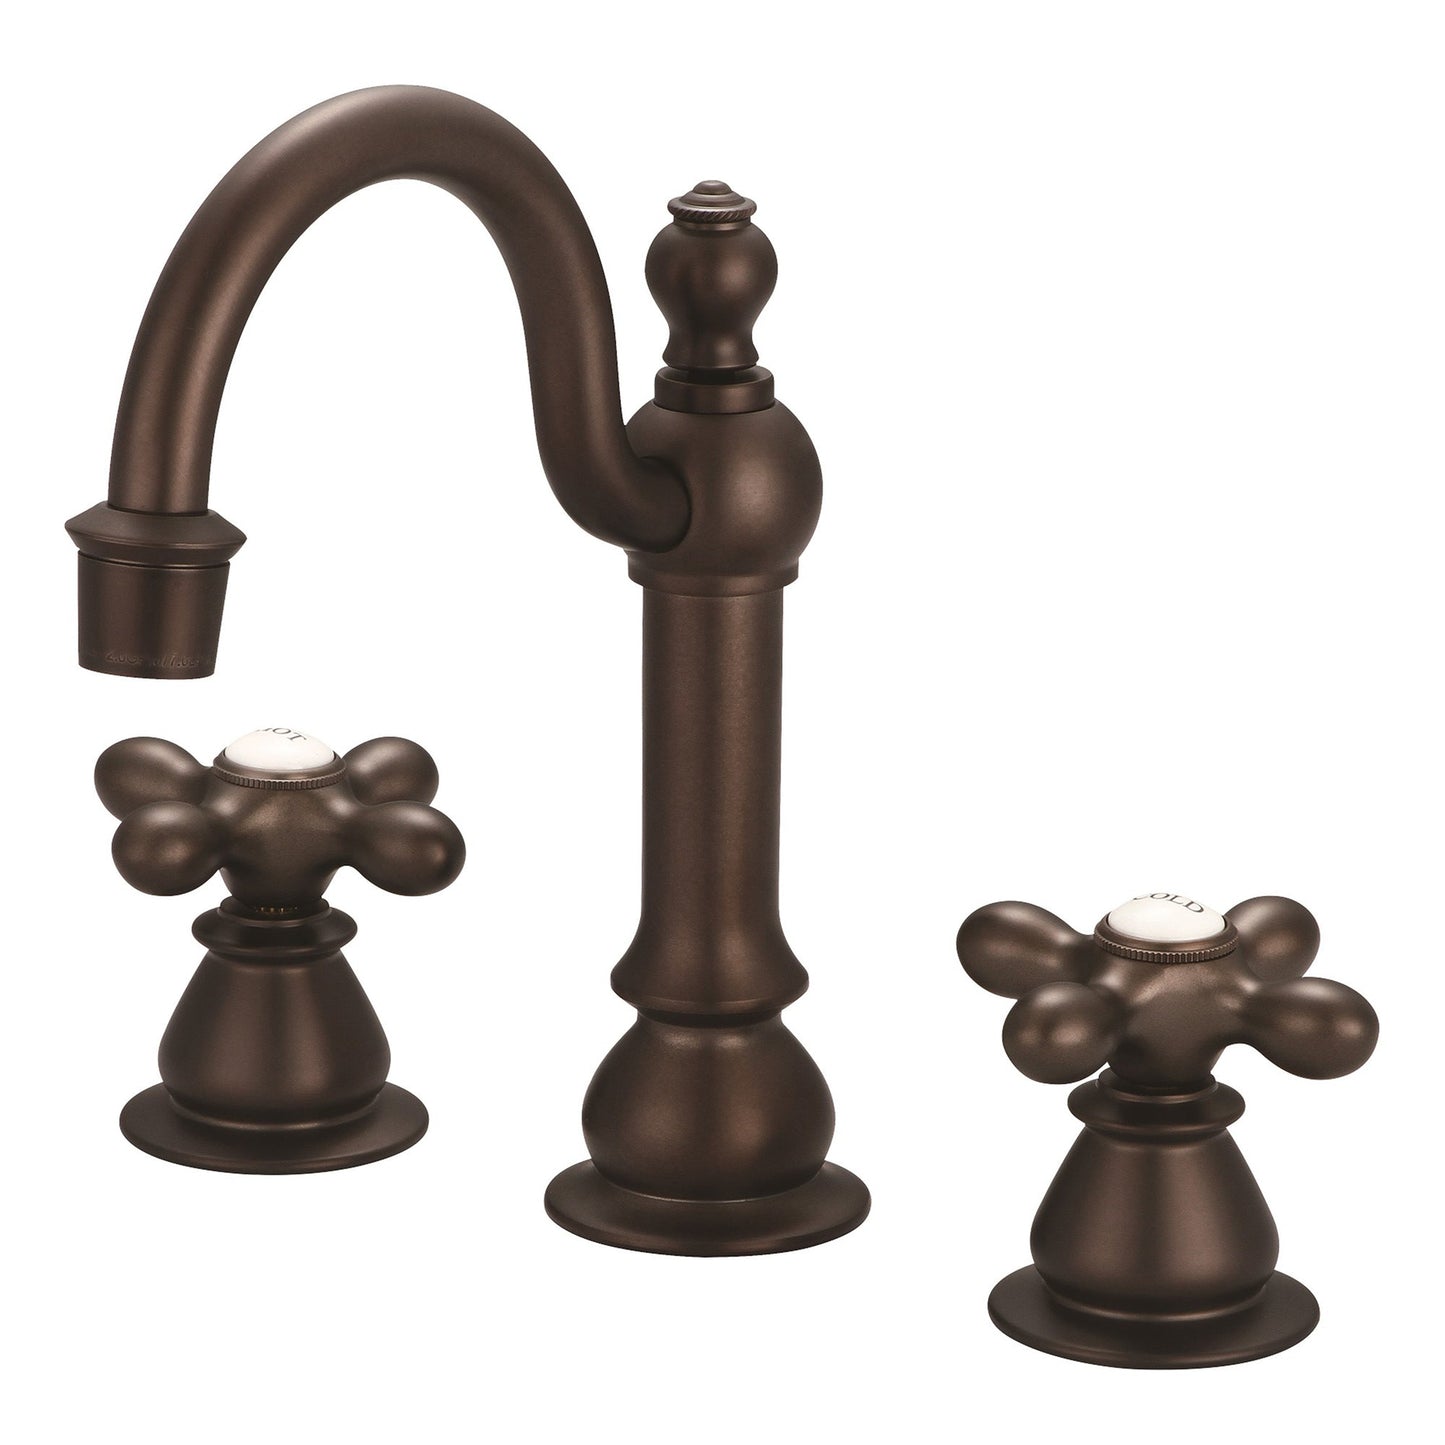 Water Creation American 20th Century Classic Widespread Lavatory F2-0012 8" Brown Solid Brass Faucet With Pop-Up Drain And Metal Cross Handles, Hot And Cold Labels Included